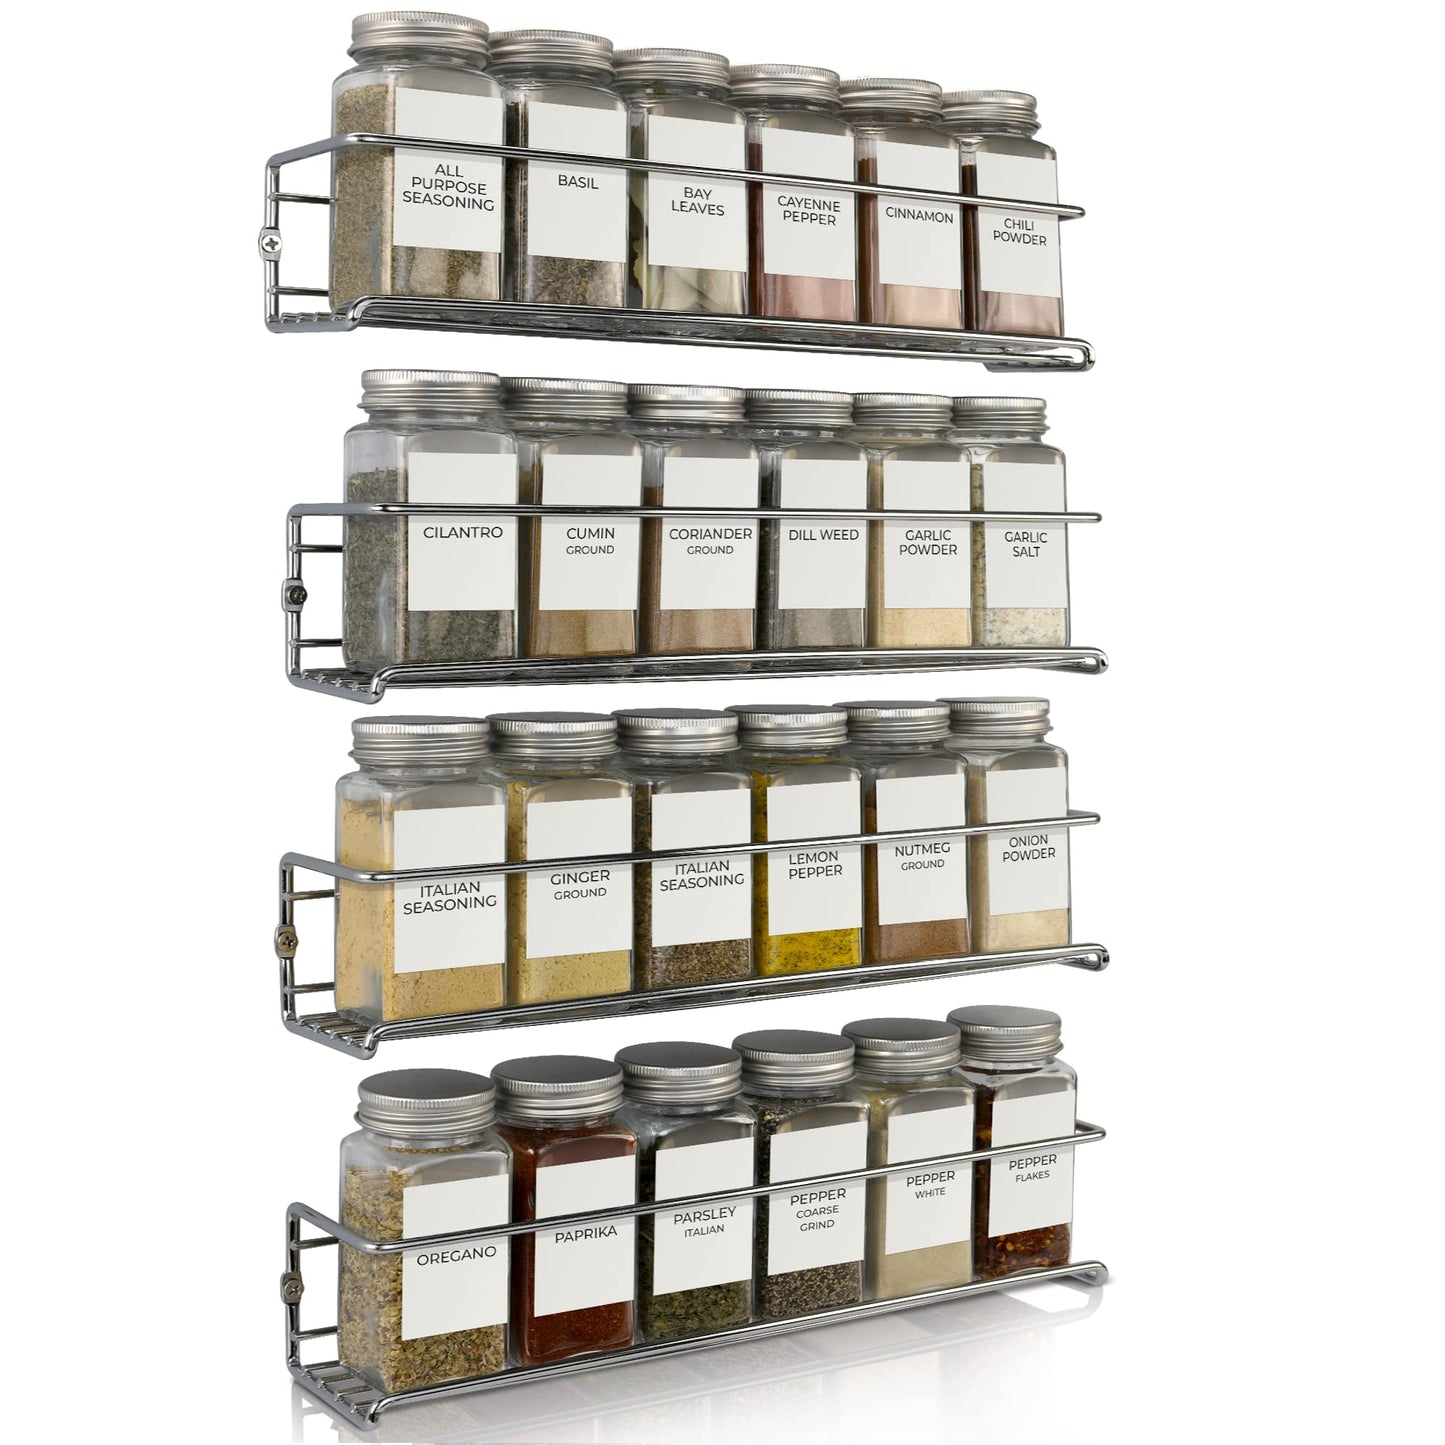 ZICOTO Premium Spice Rack Organizer for Cabinets or Wall Mounts - Space Saving Set of 4 Hanging Racks - Perfect Seasoning Organizer For Your Kitchen Cabinet, Cupboard or Pantry Door